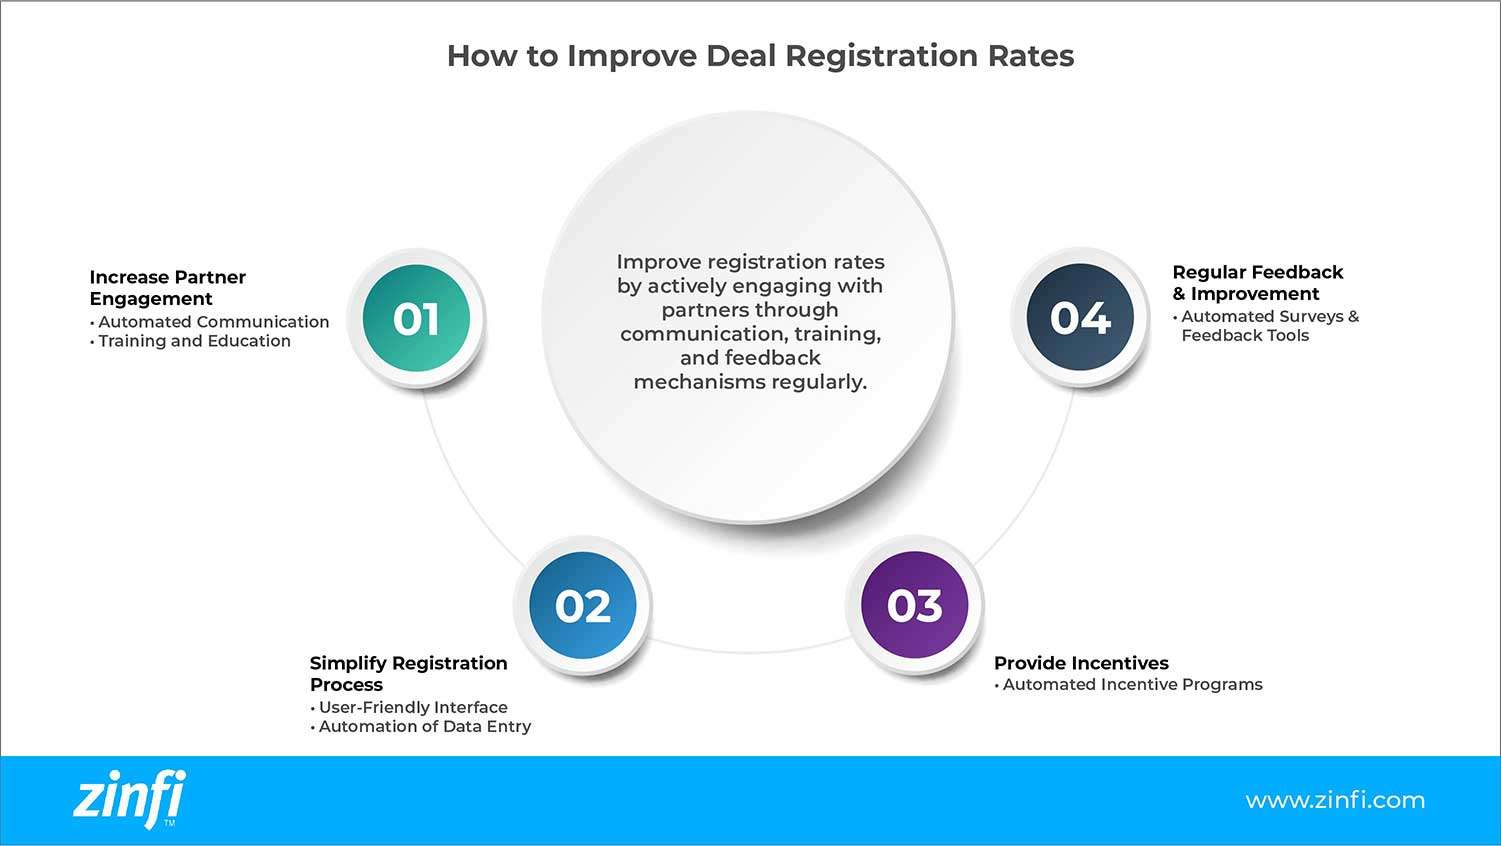 Infographic Showing Tips to Improve Deal Registration Rates